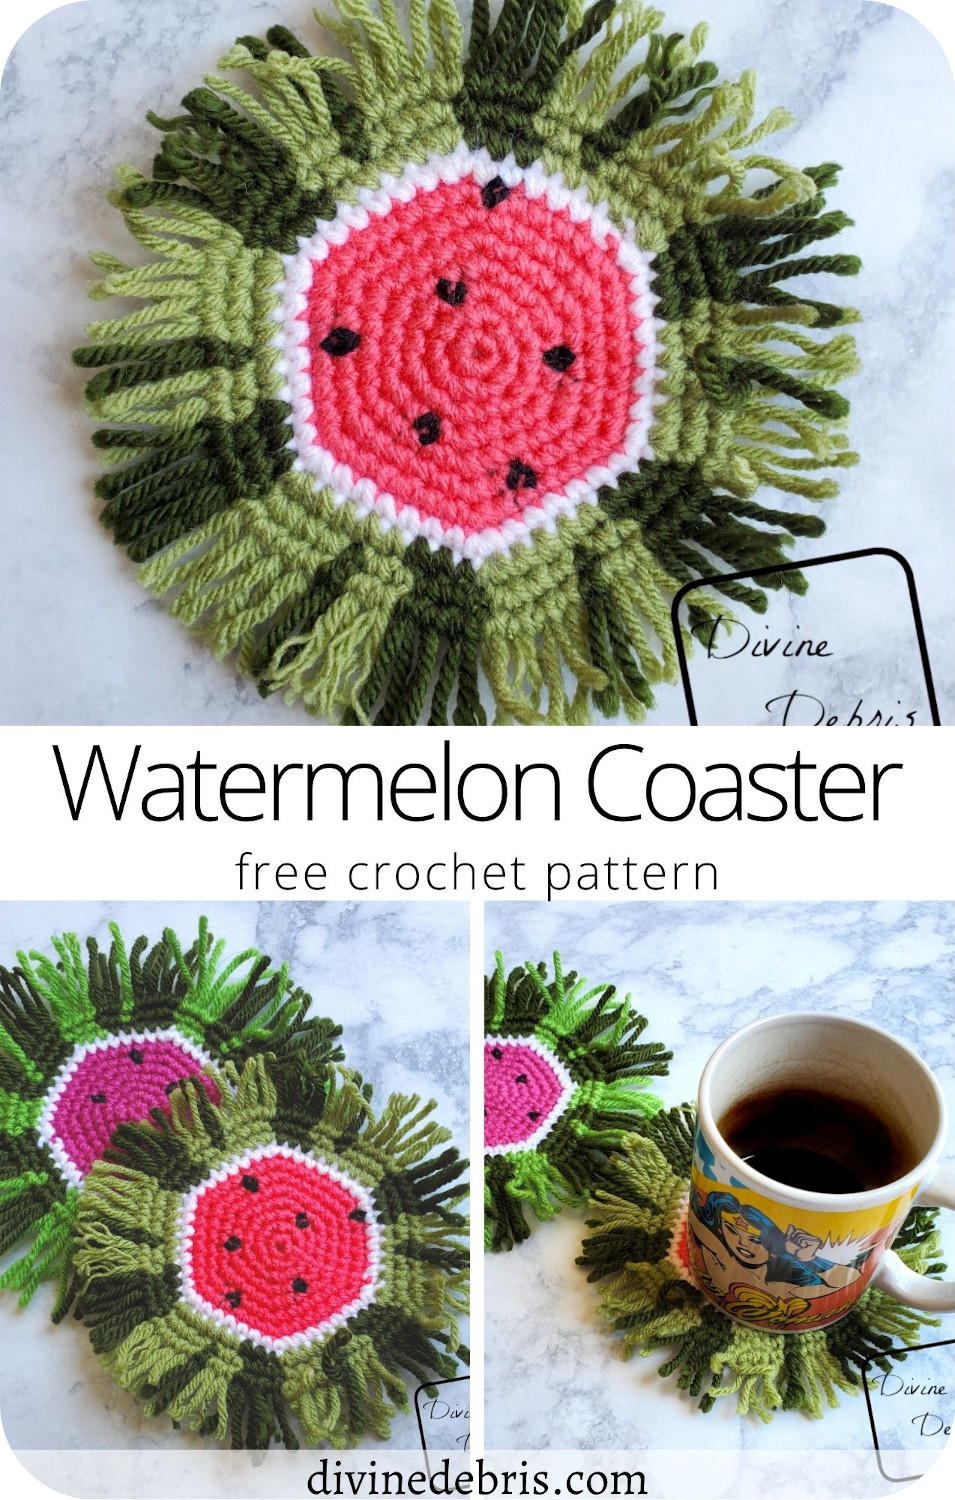 Update your Summer home decor with this fun and stash-busting free crochet pattern, the Watermelon Coaster with fringe, by DivineDebris.com